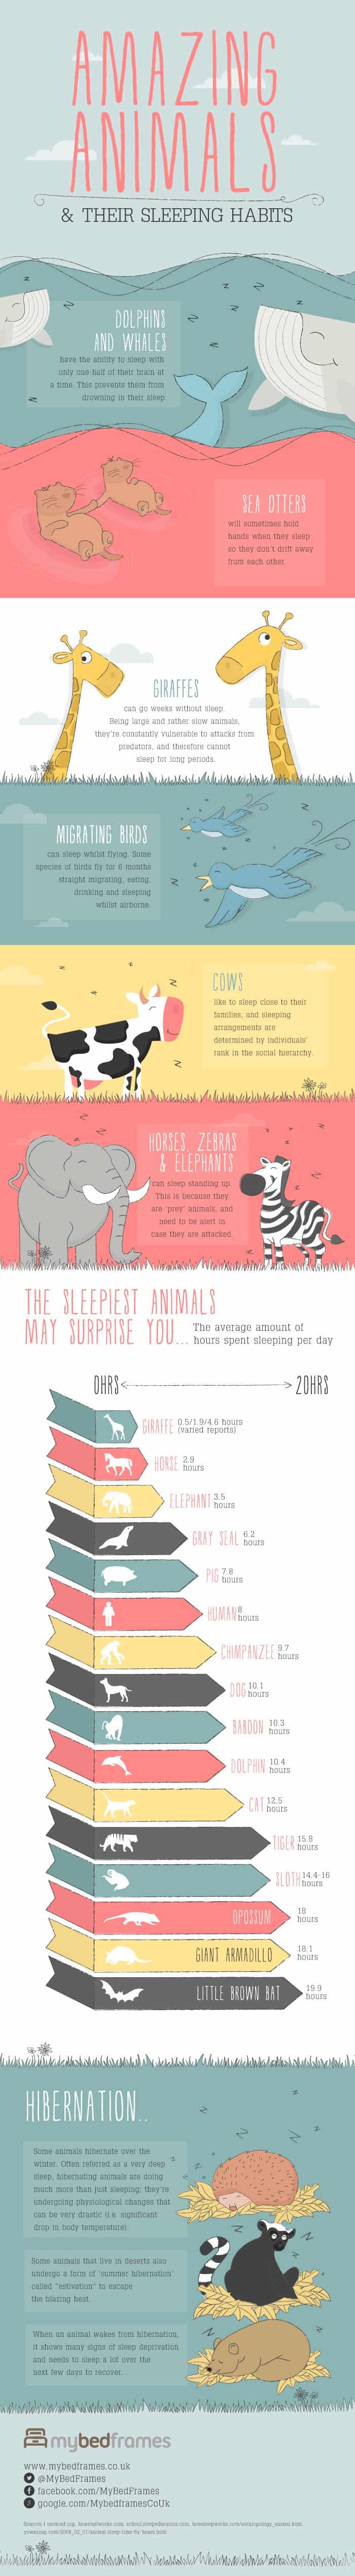 infographic about animals and their sleep habits